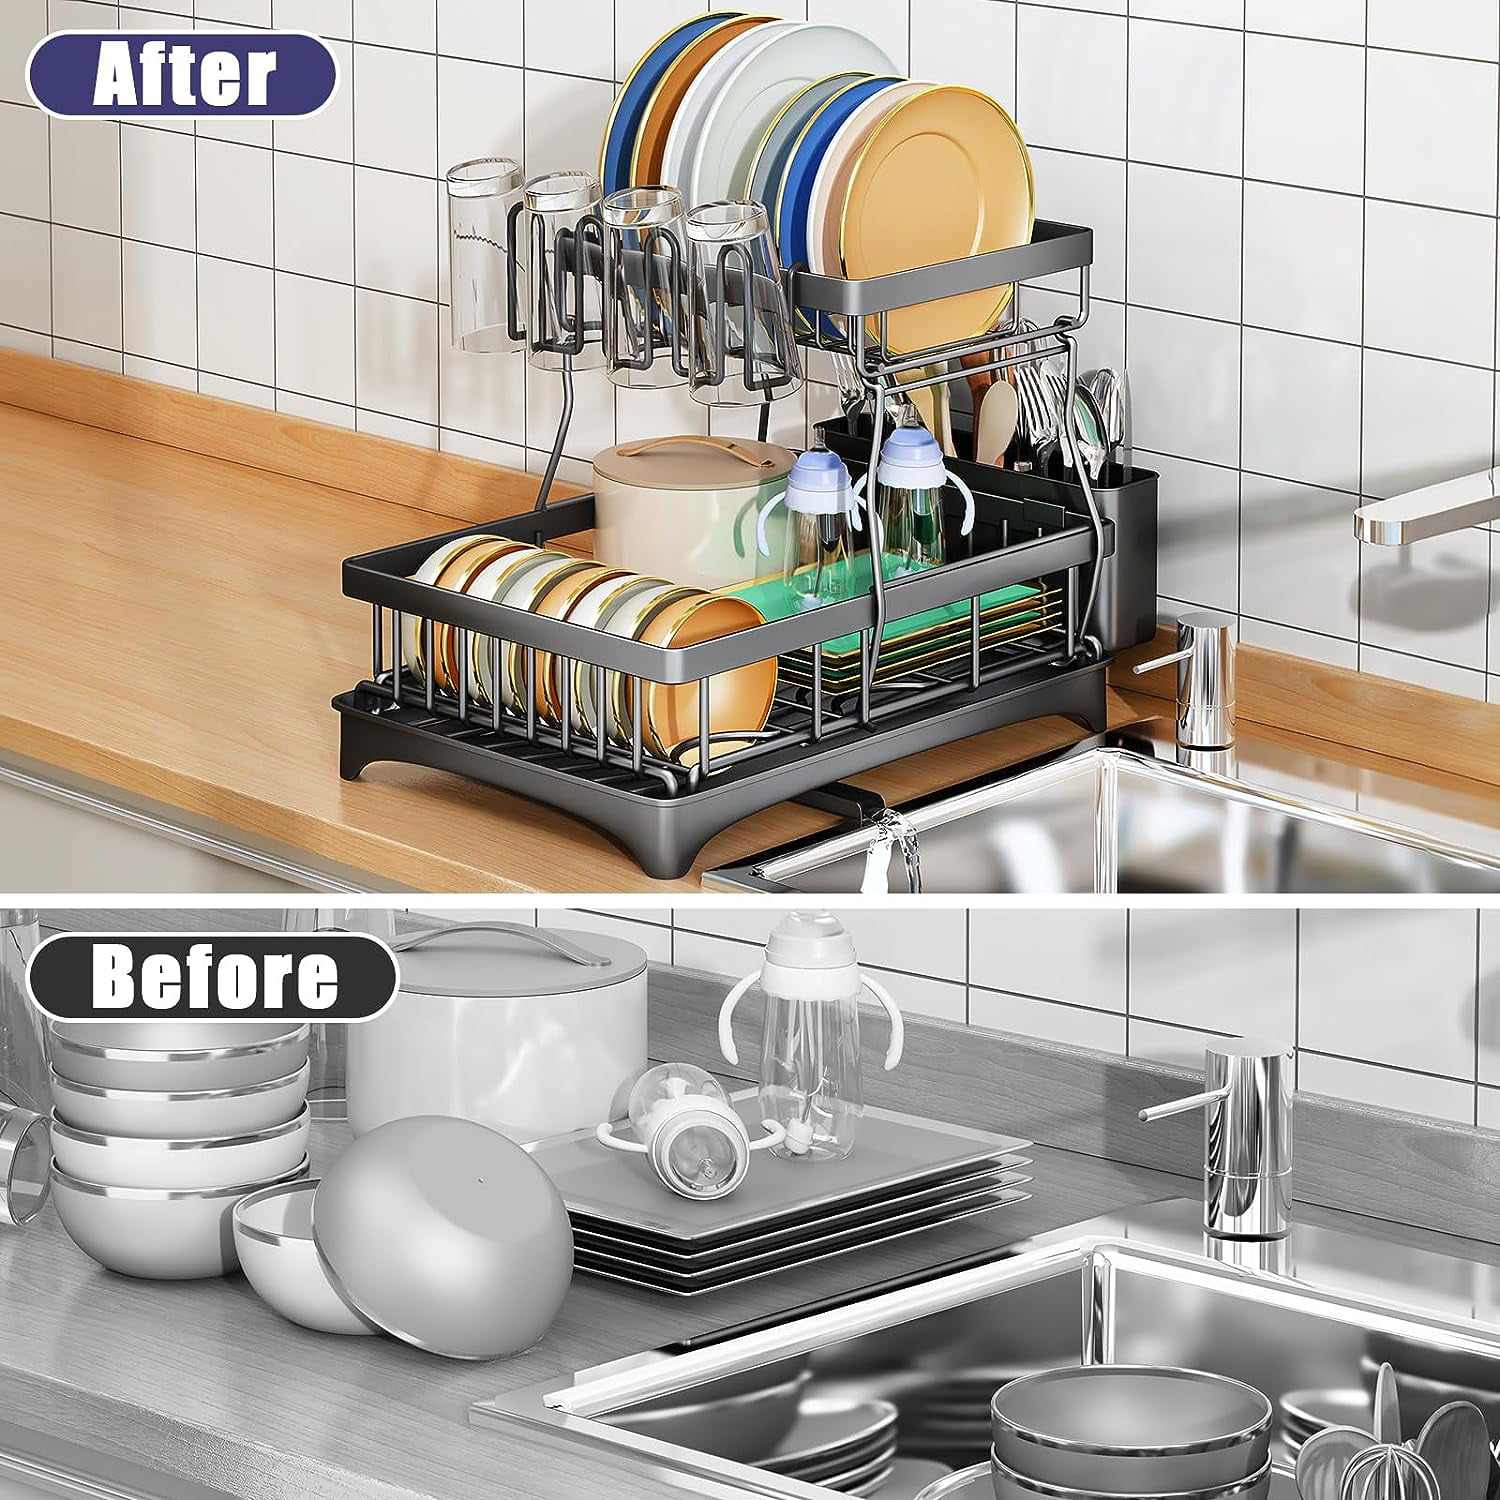 Werseon Dish Drying Rack for Kitchen Counter, 2 Tier Dish Racks